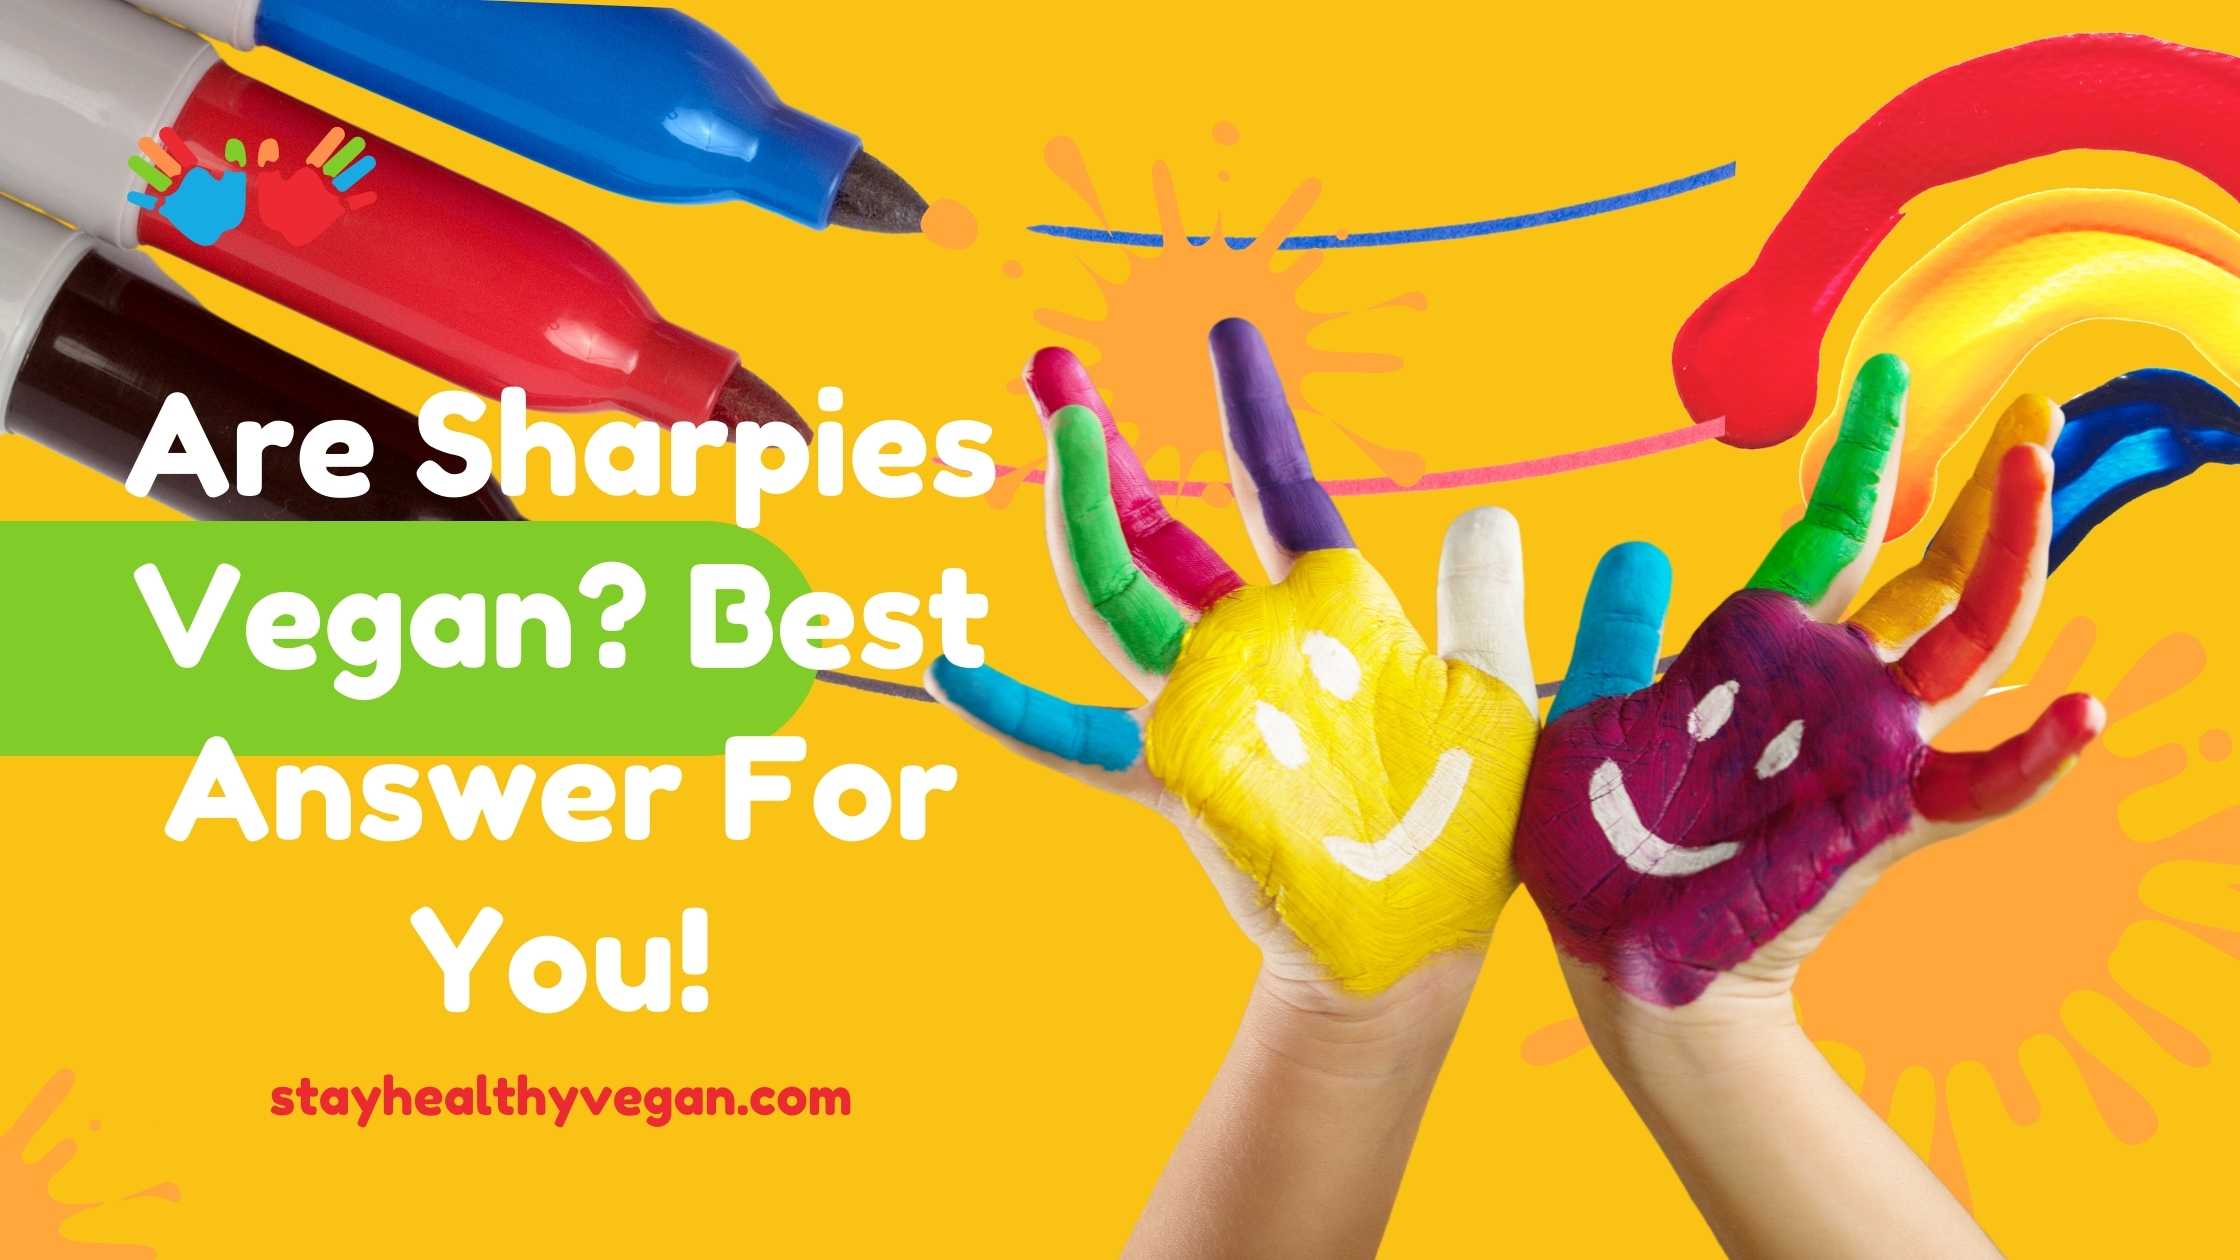 Are Sharpies Vegan? Best Answer For You!